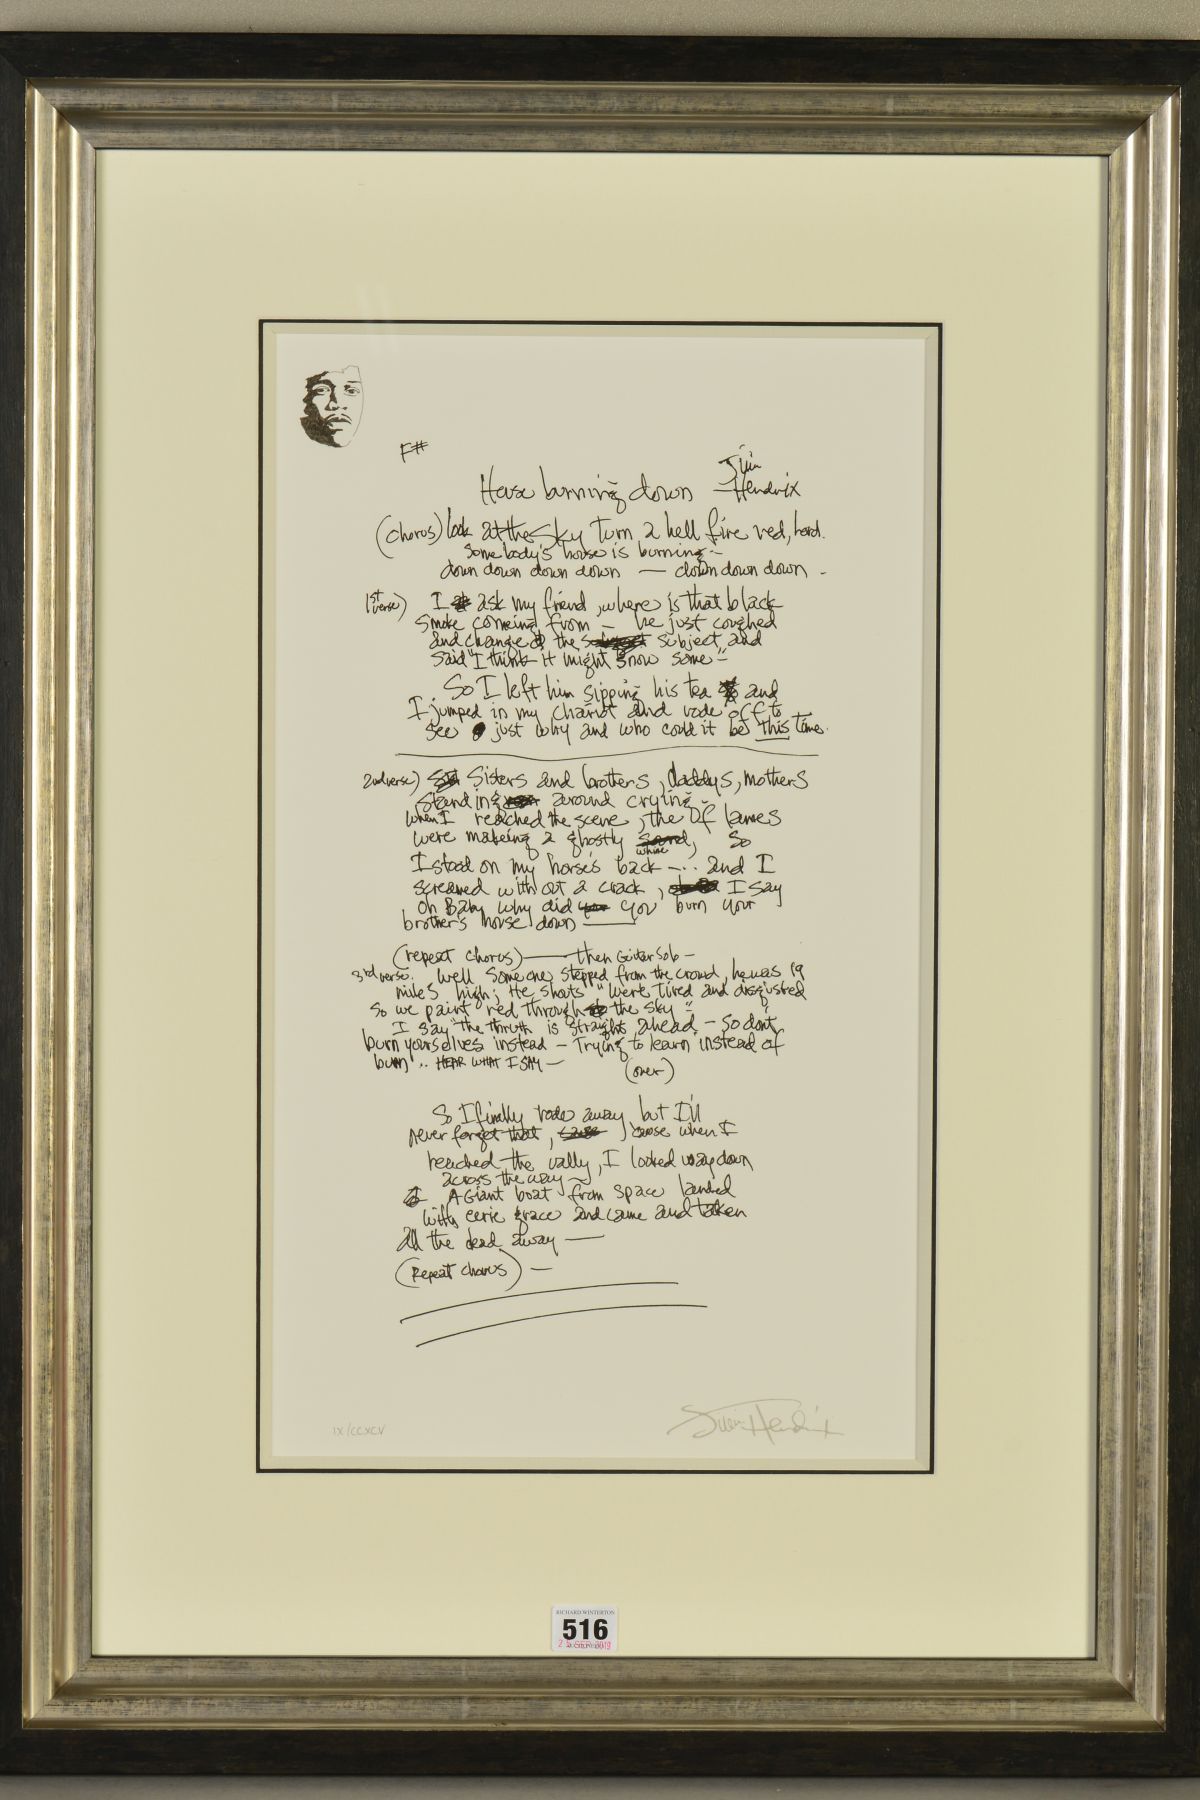 JIMI HENDRIX (AMERICAN 1942-1970) 'HOUSE BURNING DOWN', a limited edition print of the song lyrics